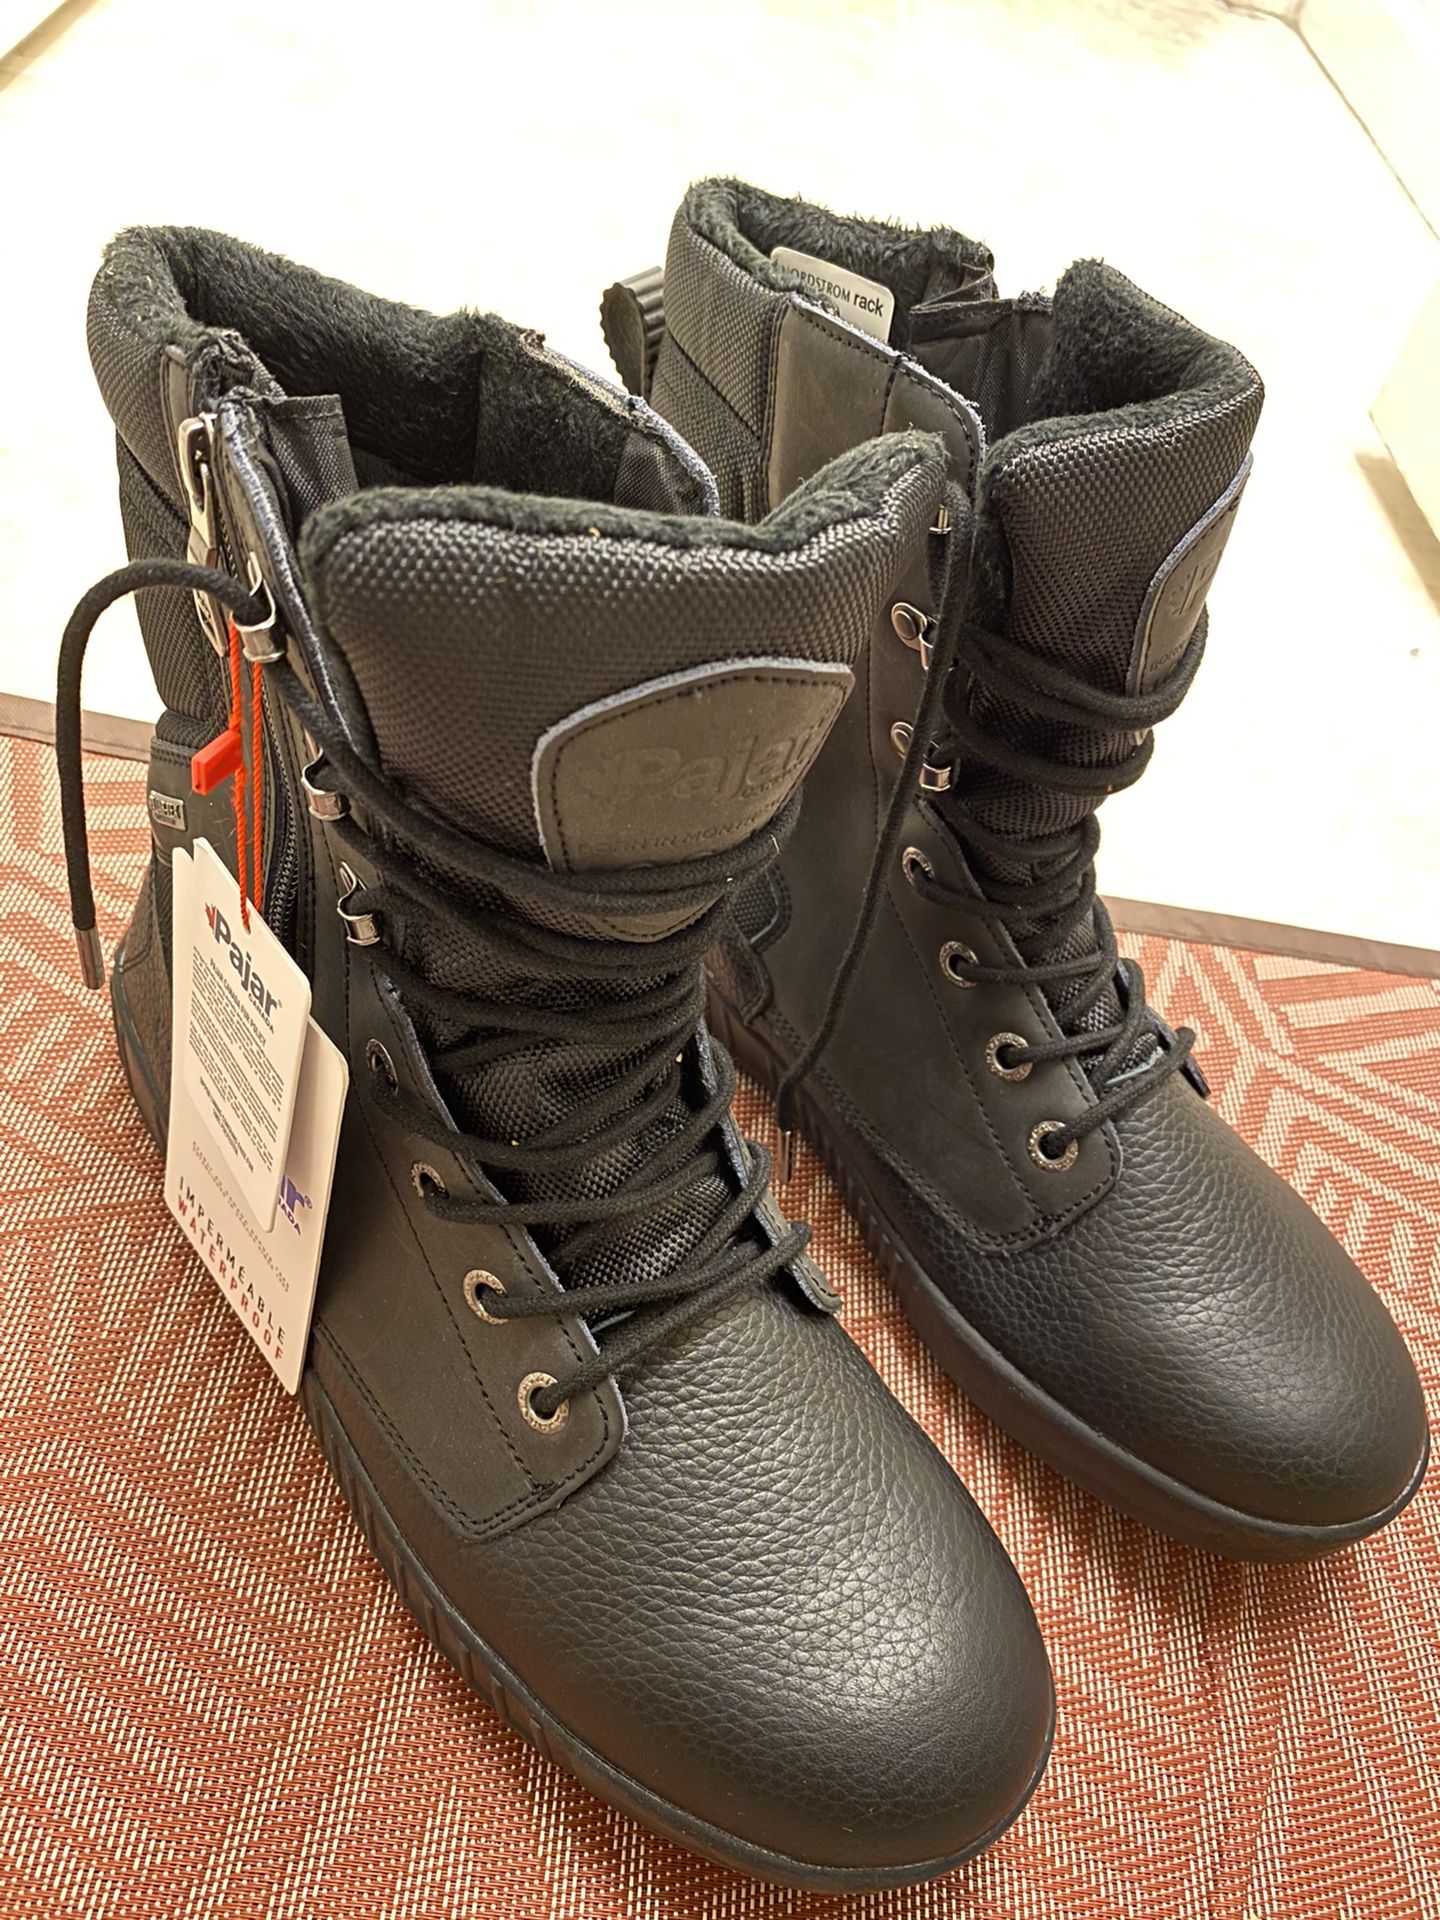 Pajar Canada Men’s Leather Boots Size 11-11.5 Brand New...  New with Tag...